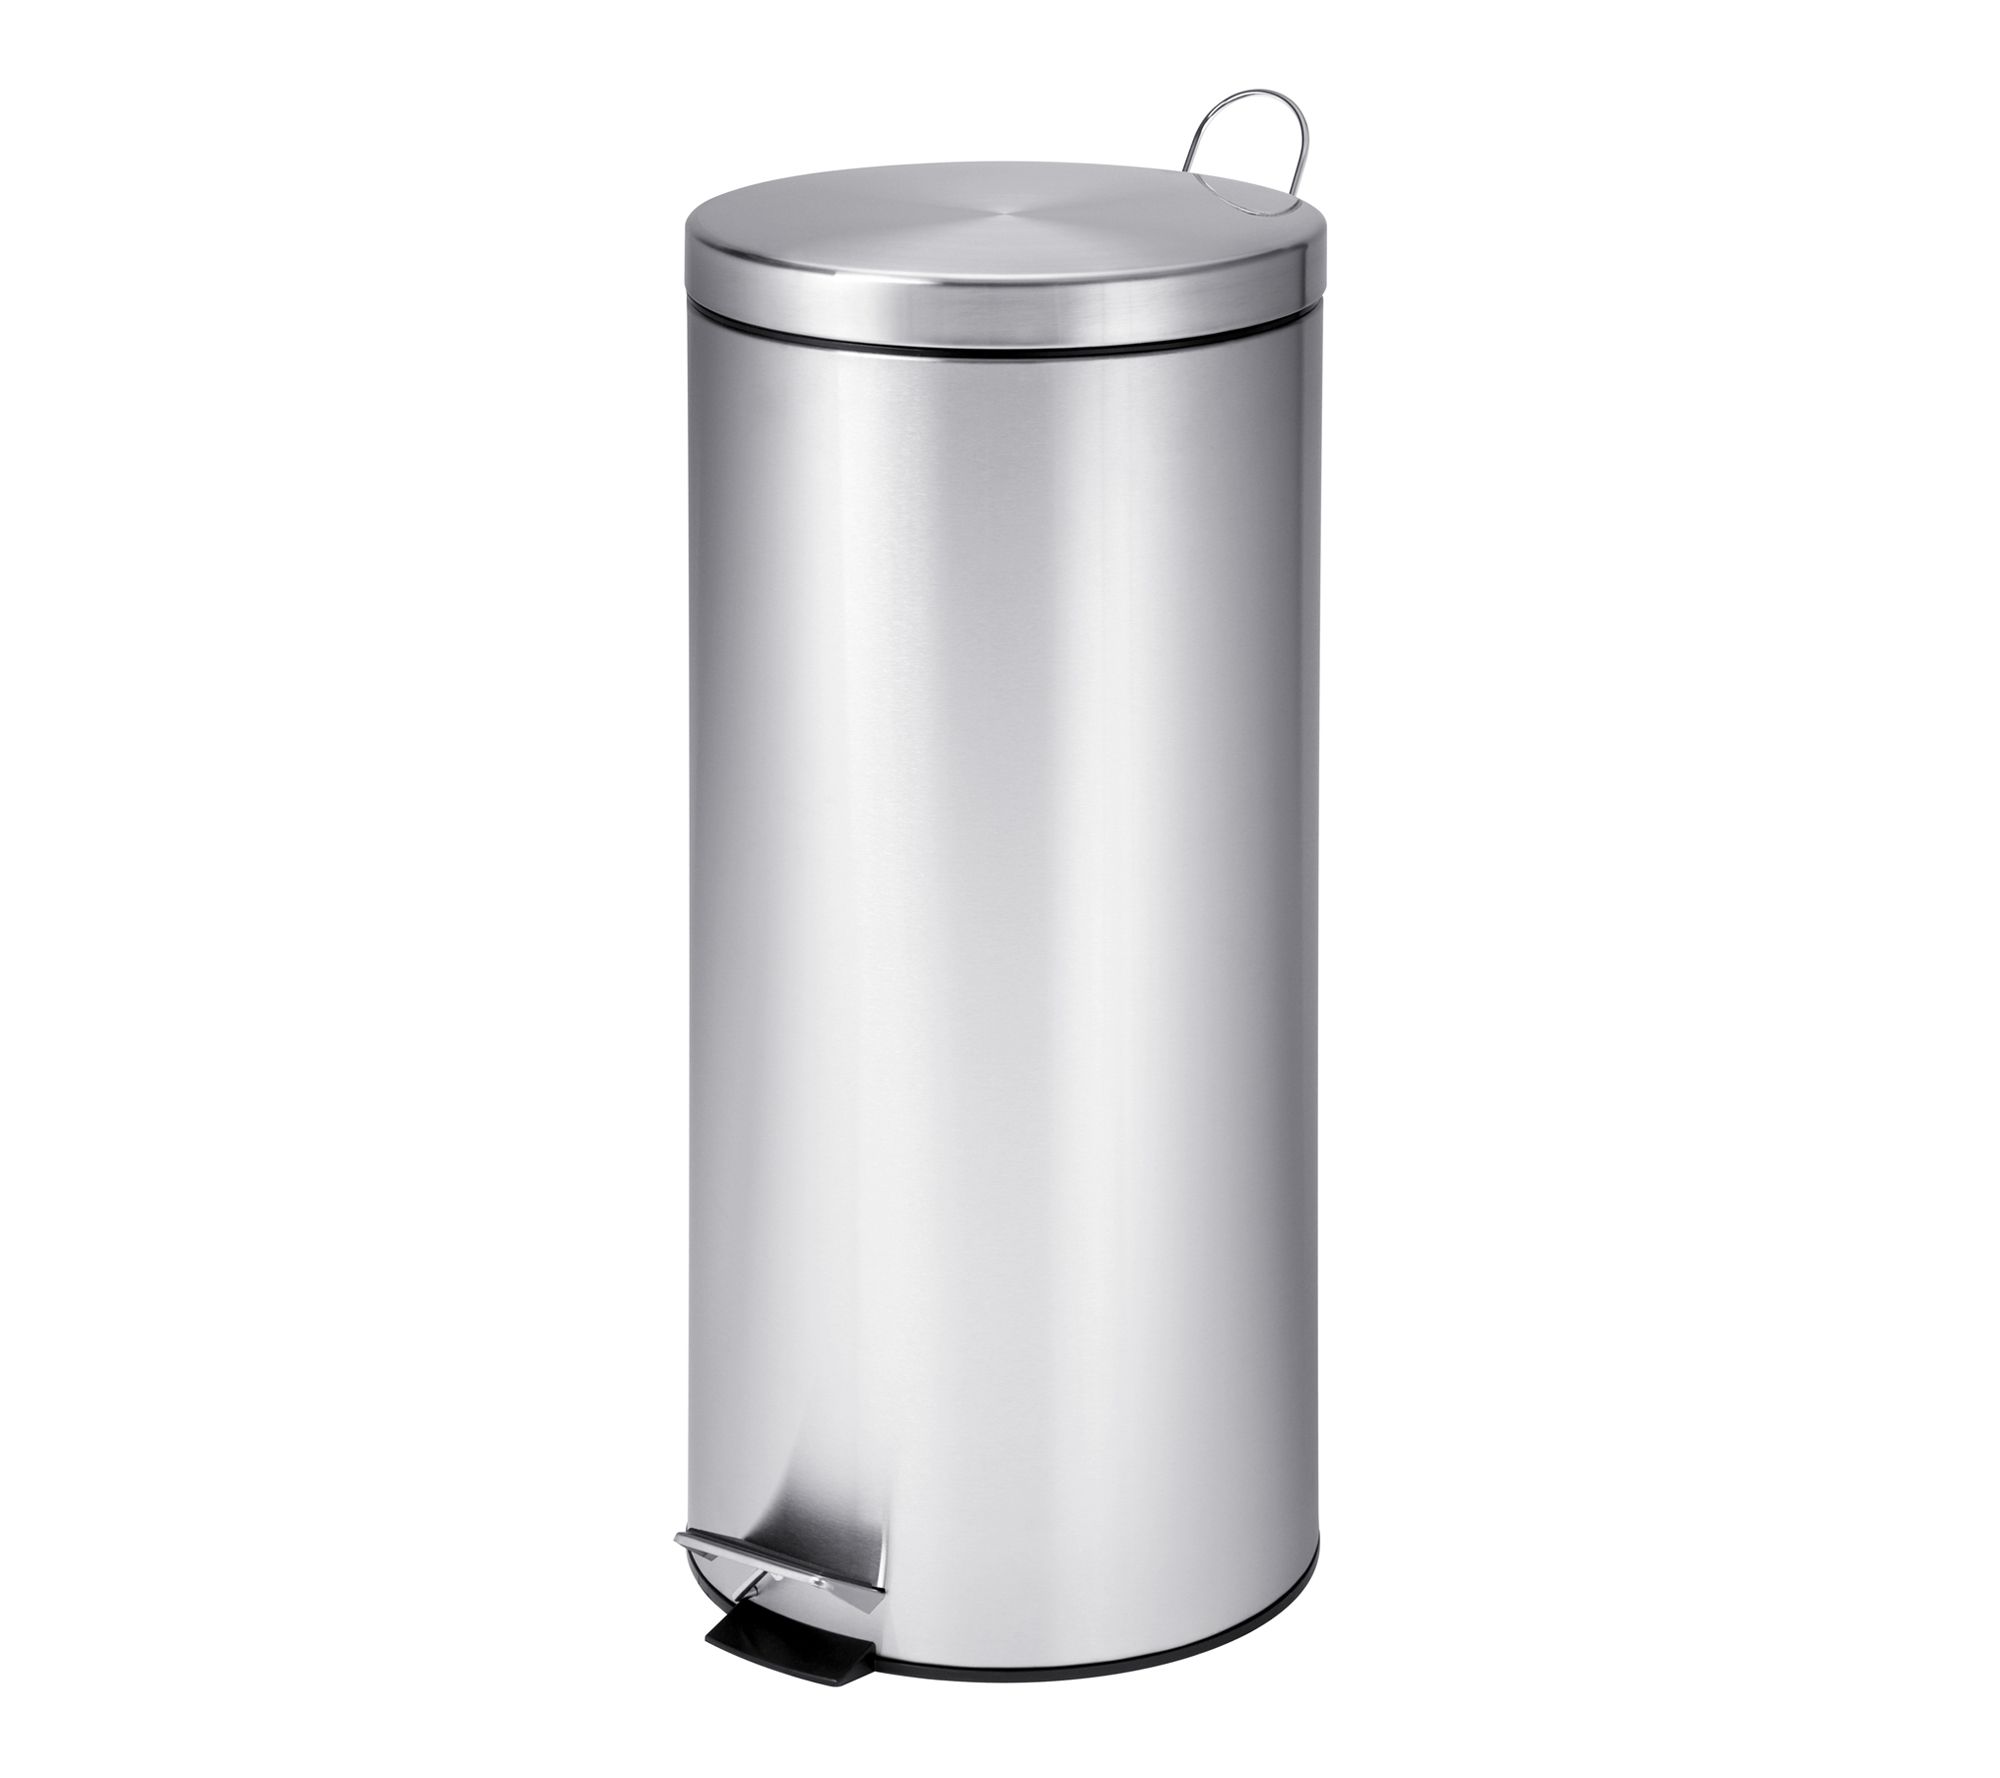 Elama 30 Liter/7.9 Gallon Soft Pedal Step Cylindrical Home and